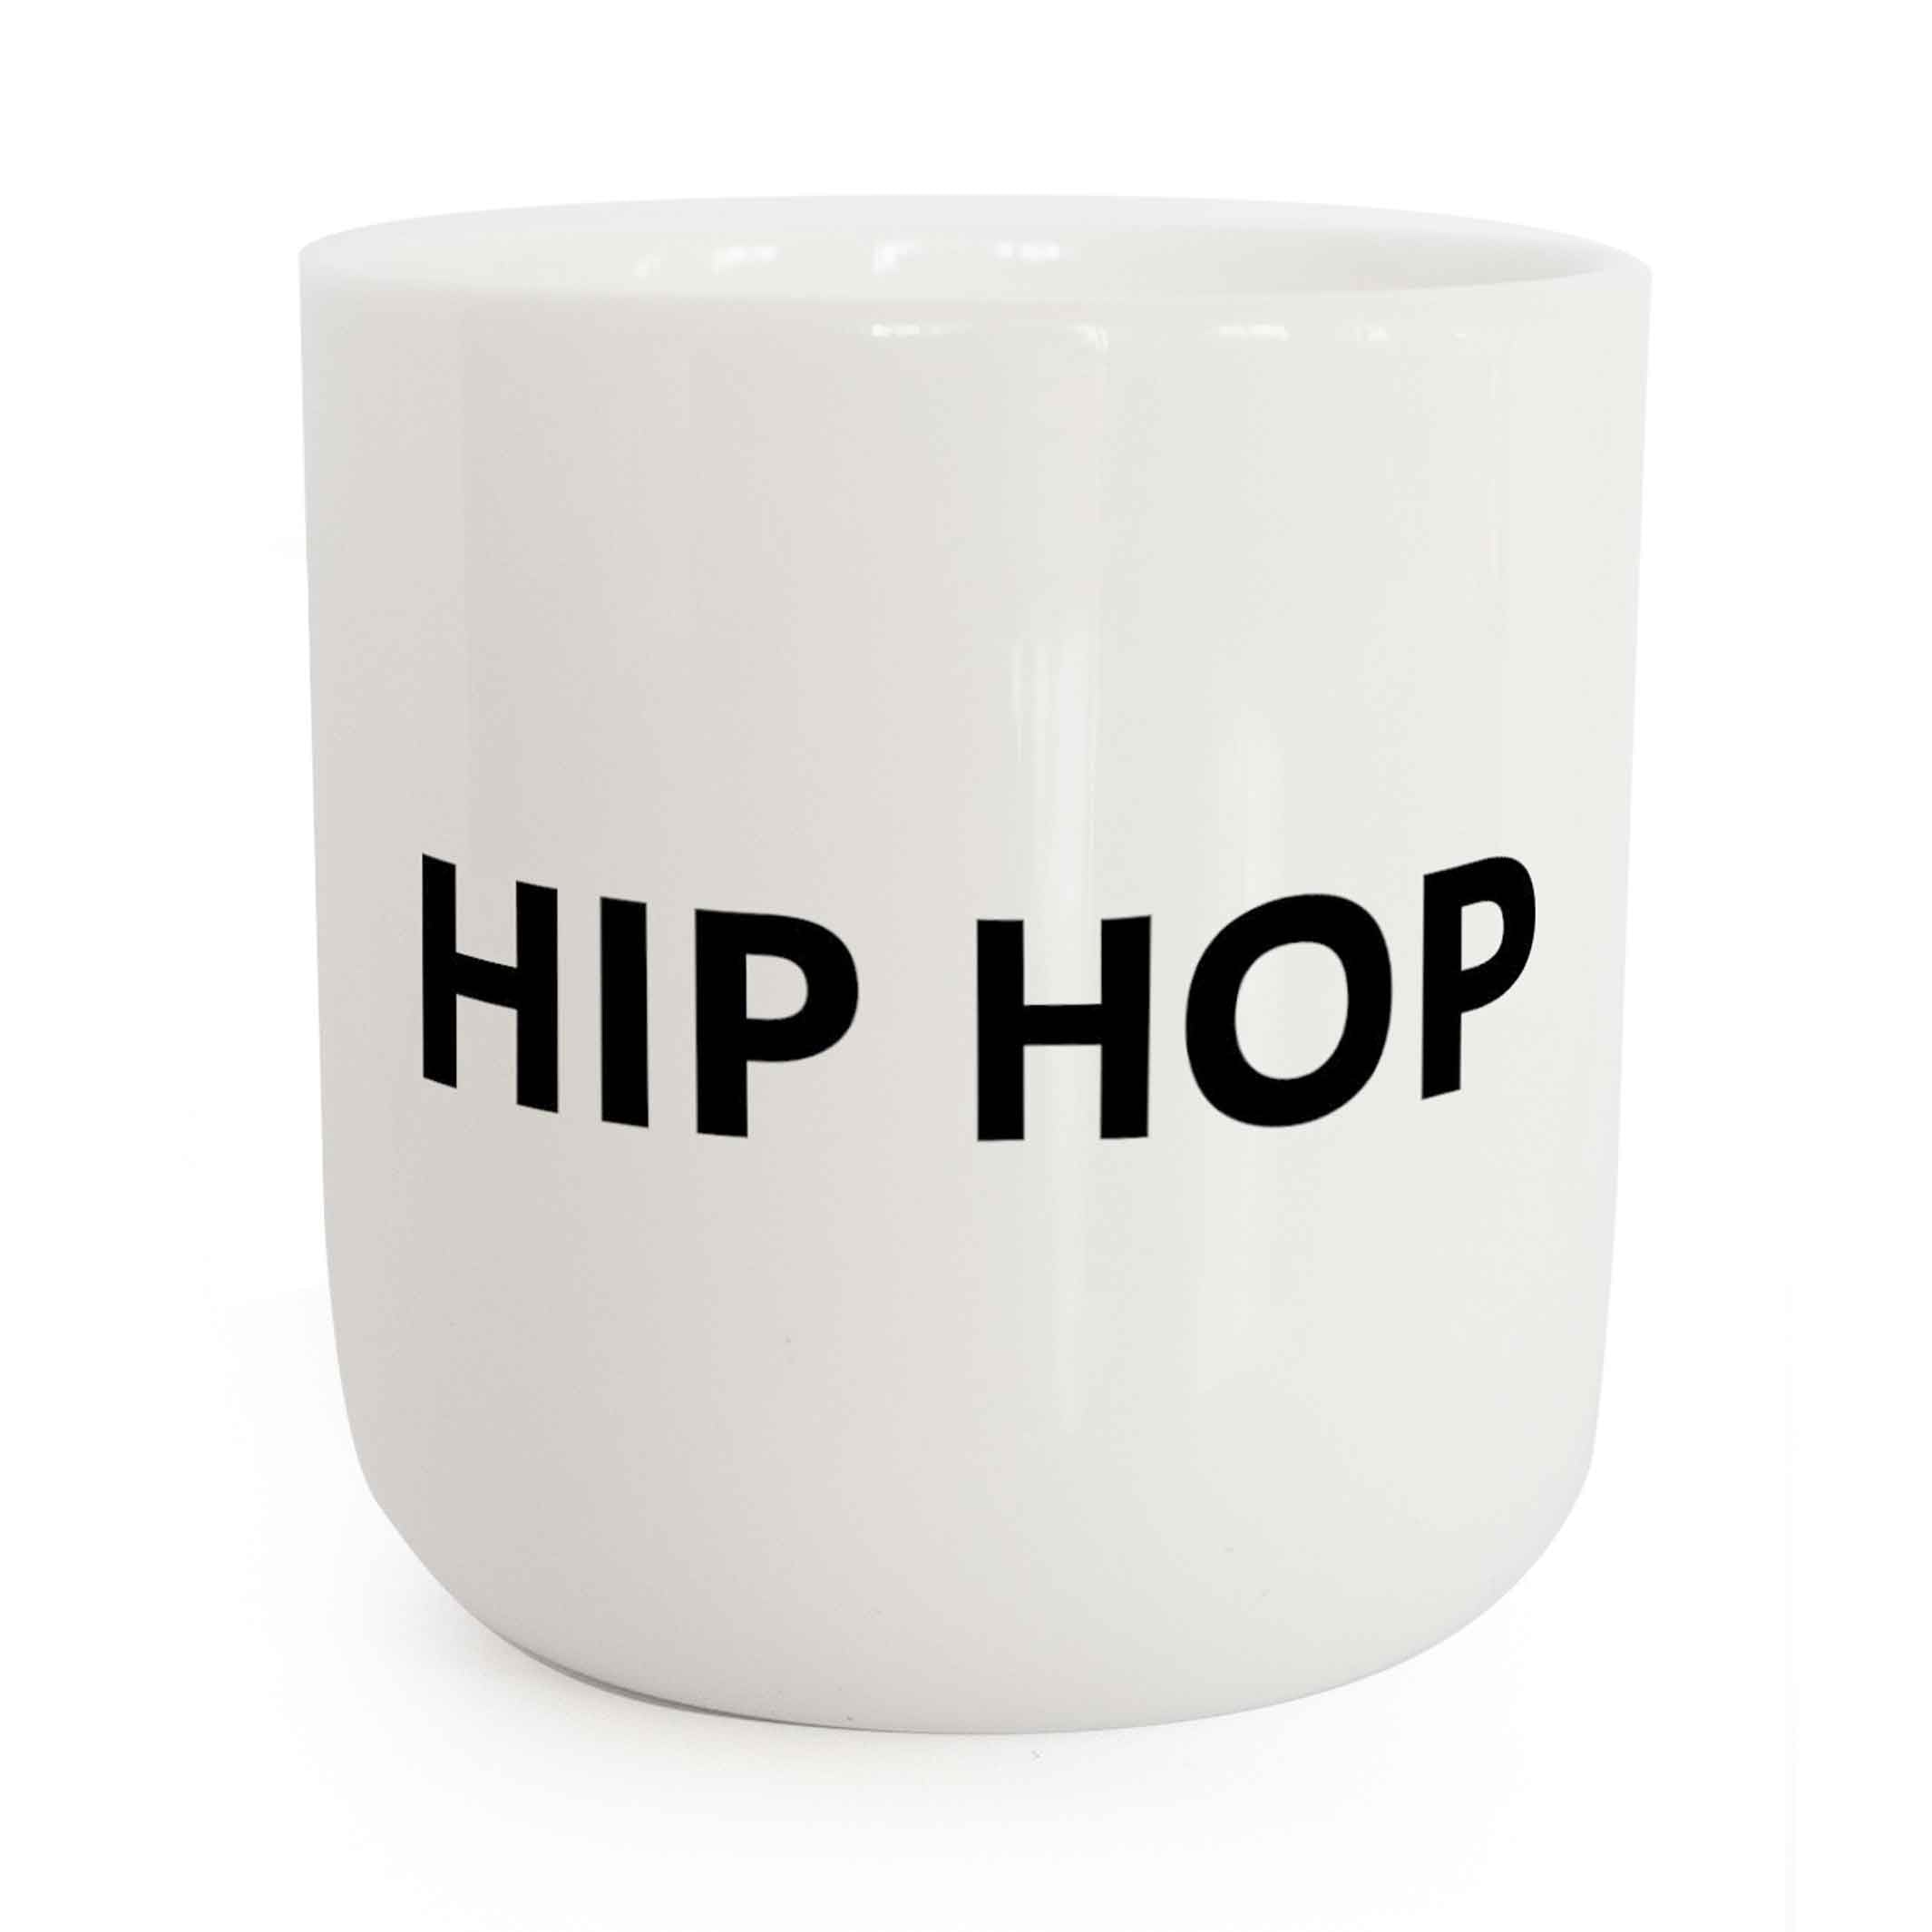 HIP HOP | white coffee & tea MUG with black typo | Beat Collection | PLTY